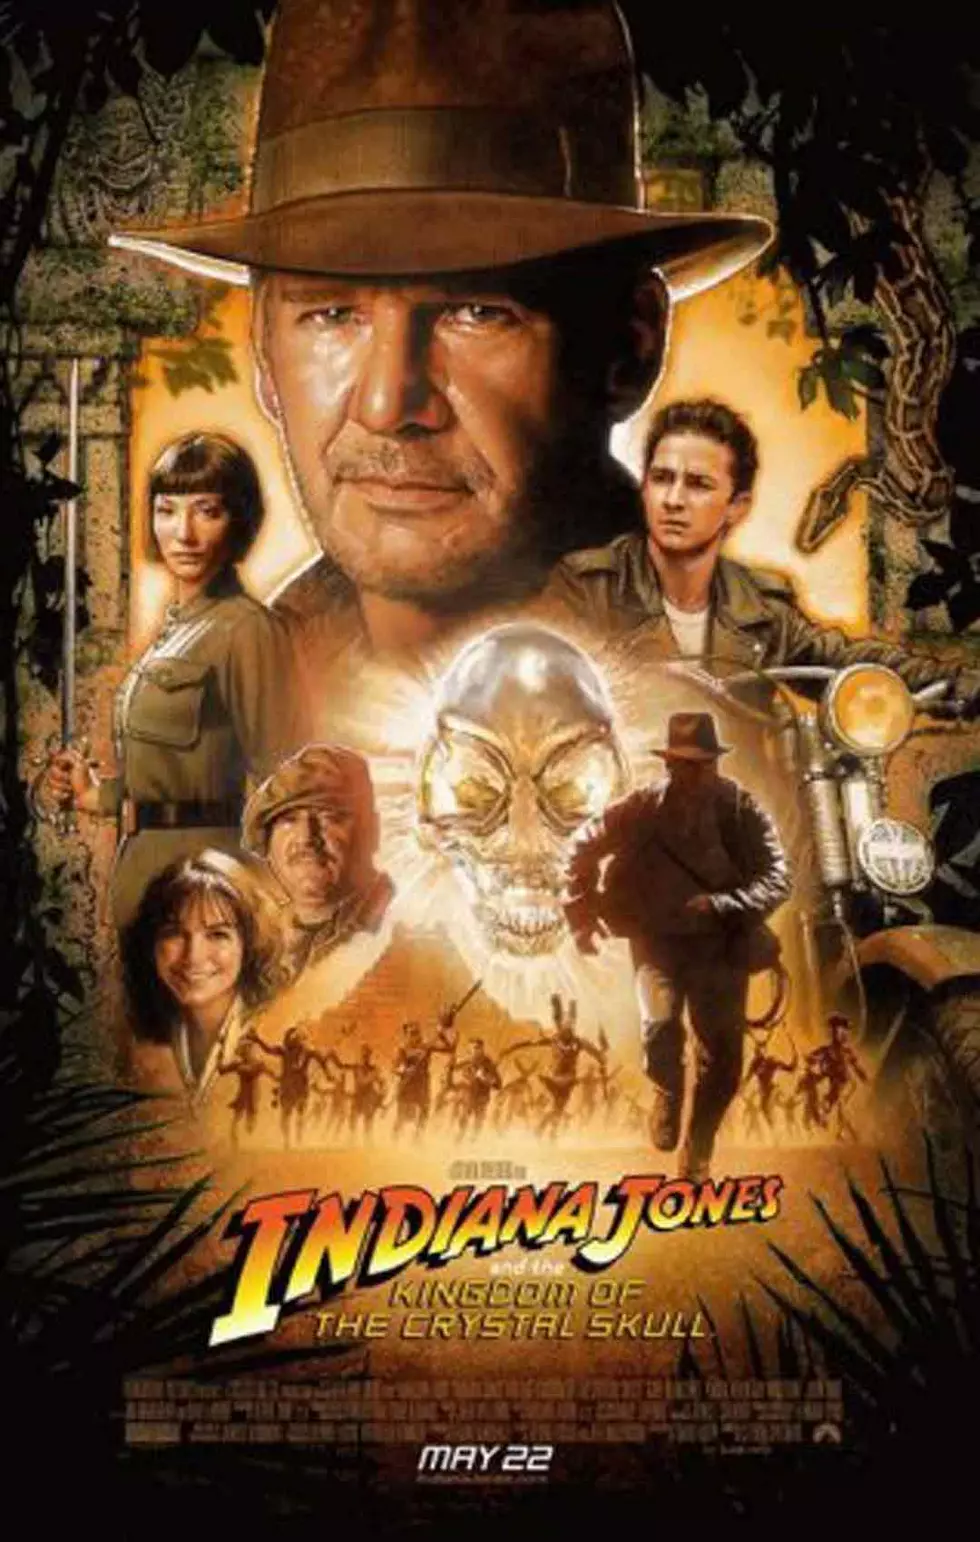 Indiana Jones movies ranked from worst to best